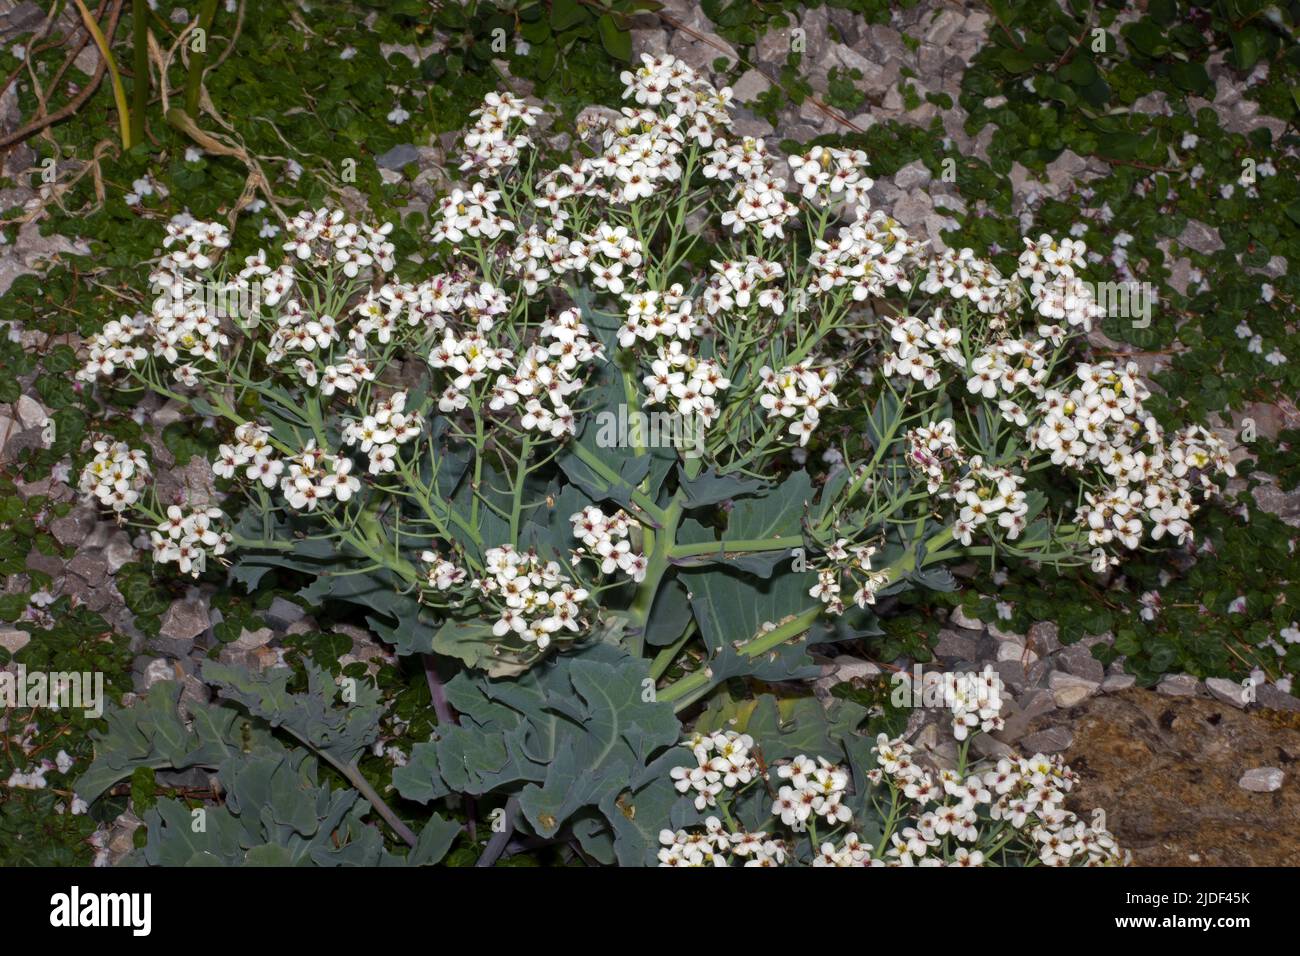 Crambe maritima (sea kale) is a halophytic (salt-tolerant) species found on coastal shingle and appears to be endemic to Europe. Stock Photo